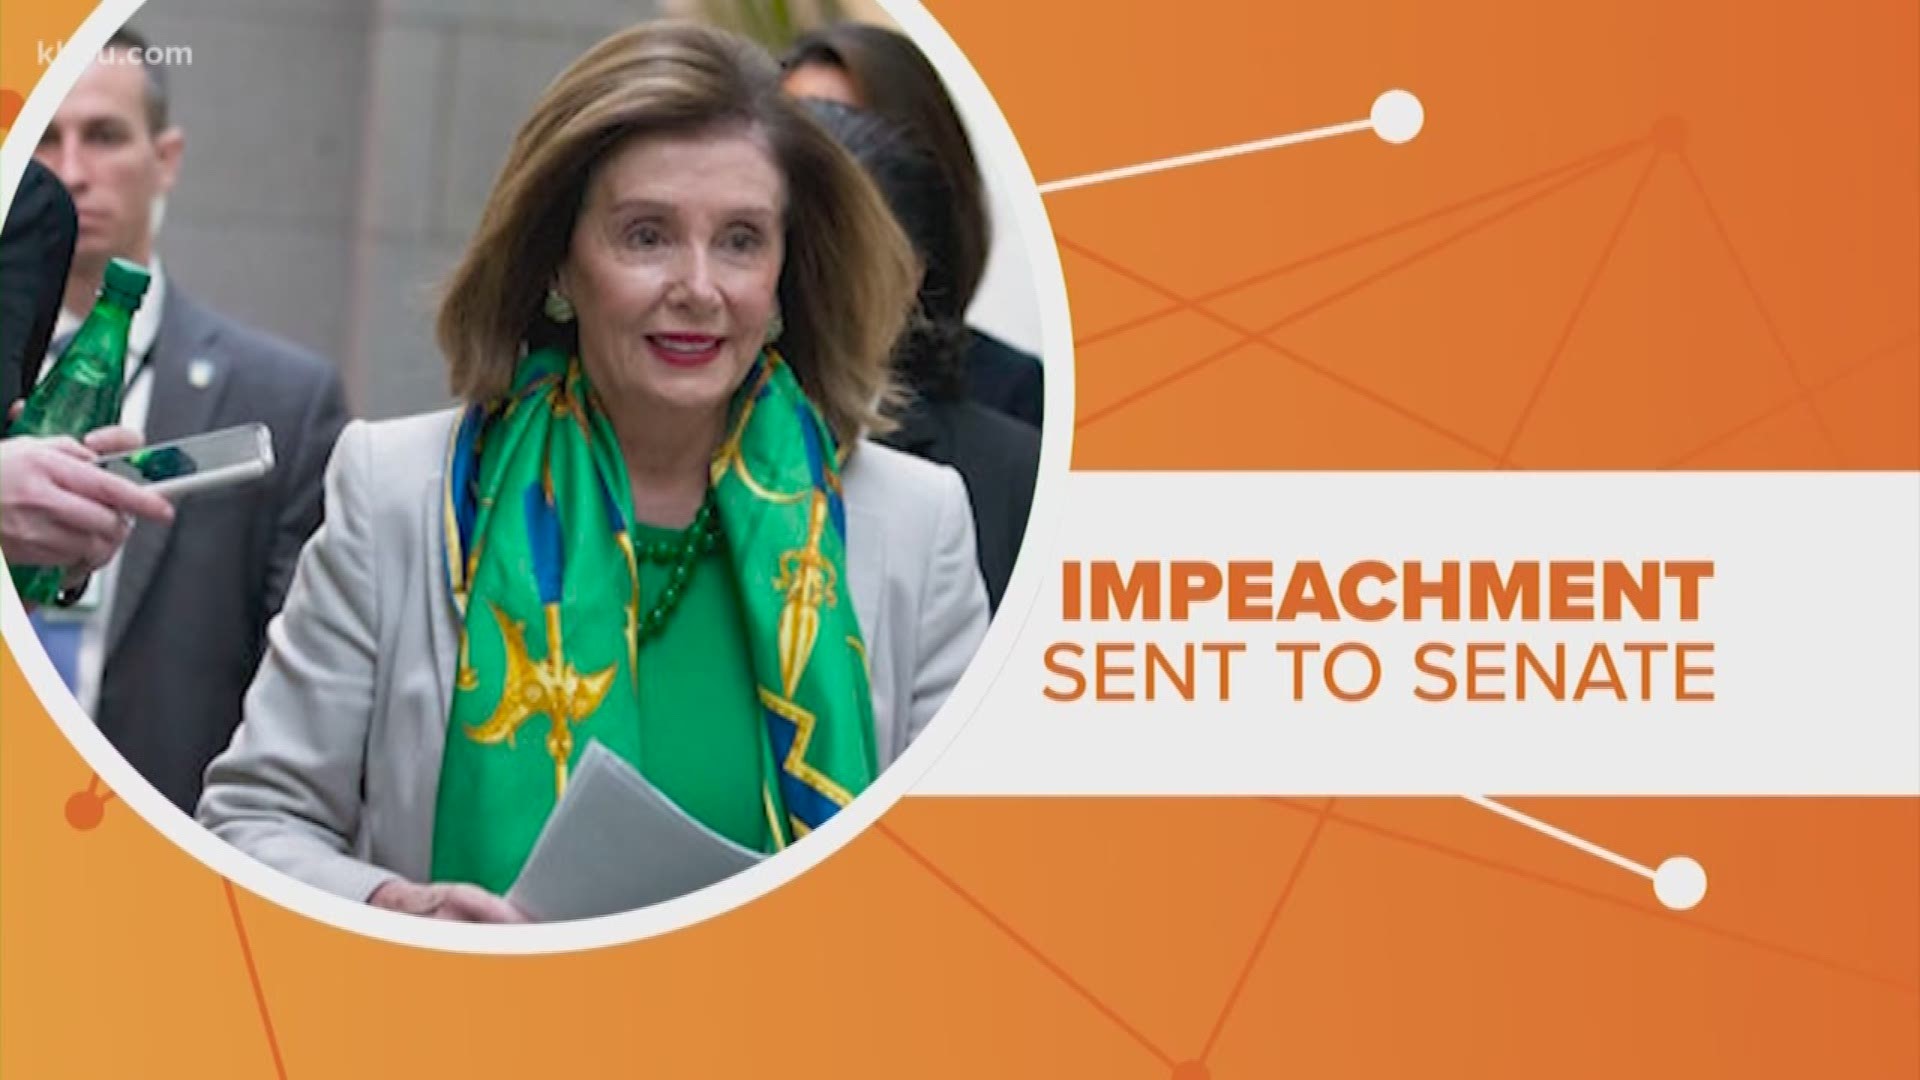 Once the articles of impeachment reach the Senate – what's next, what's the next step? Stephanie Whitfield connects the dots.